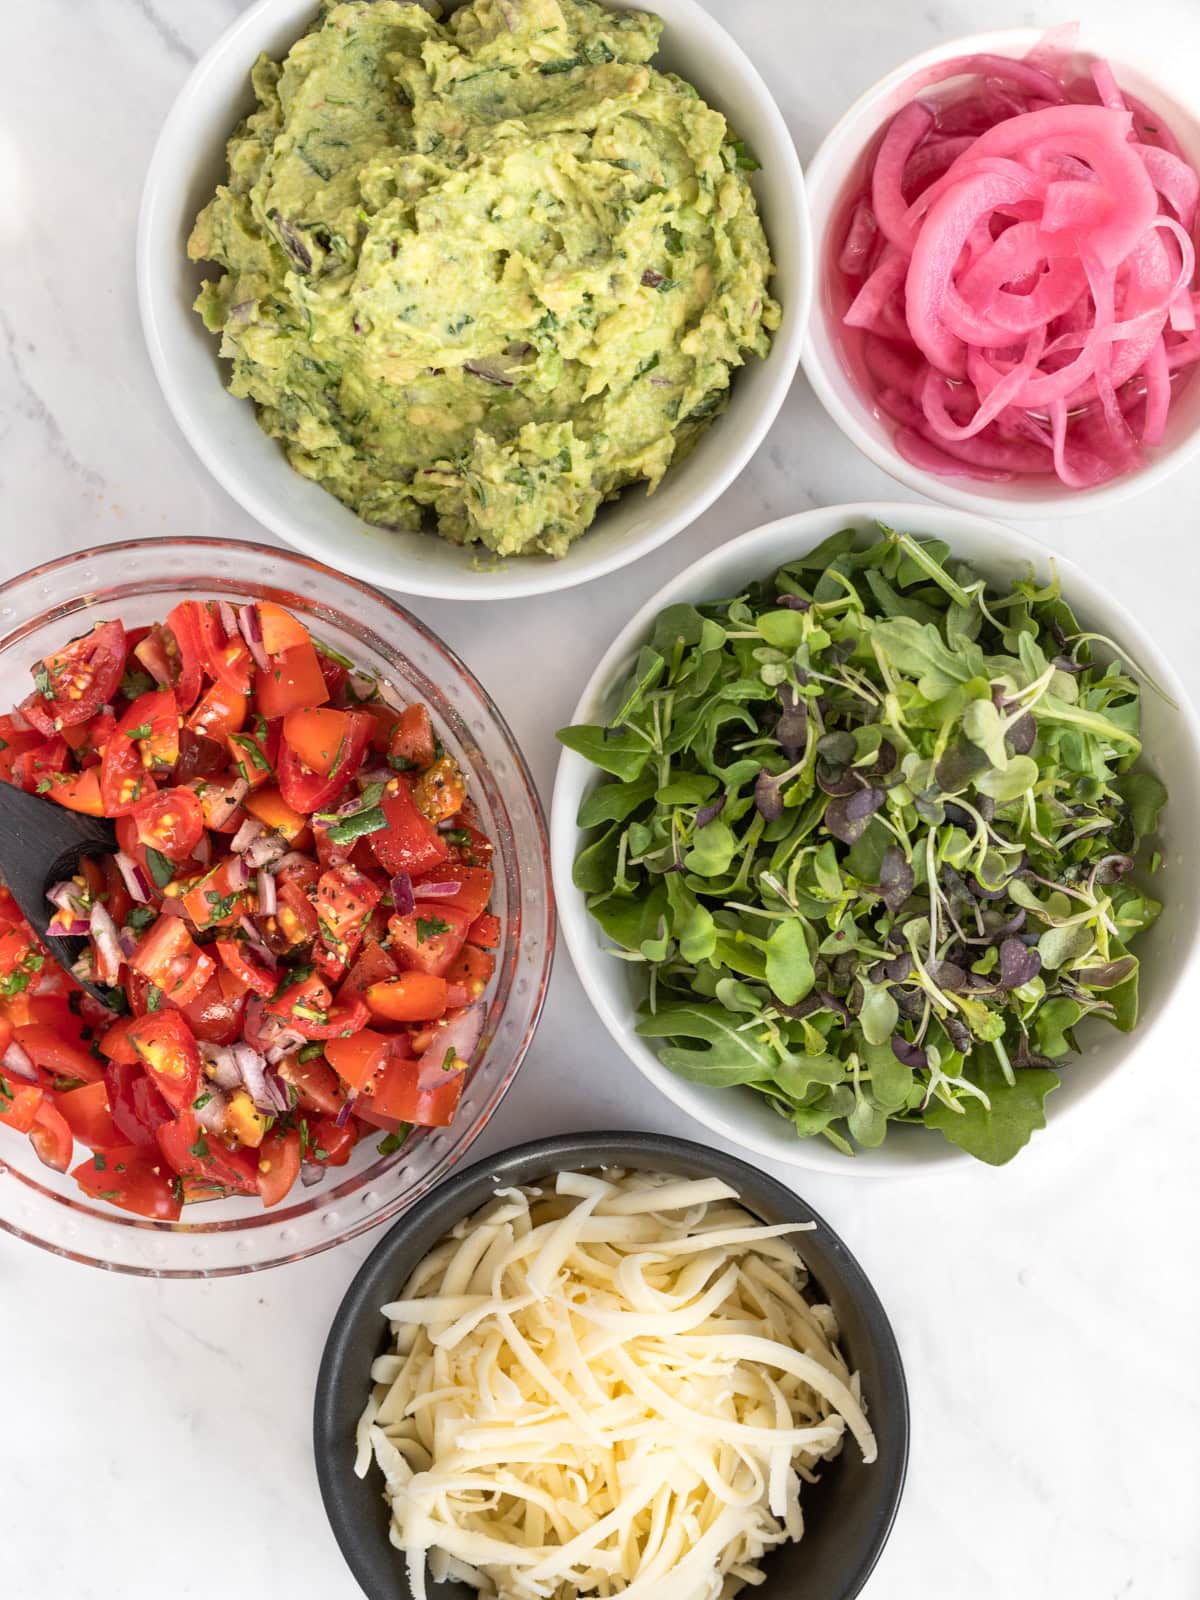 Taco toppings including guacamole, pickled onions, microgreens, pico and vegan cheese.